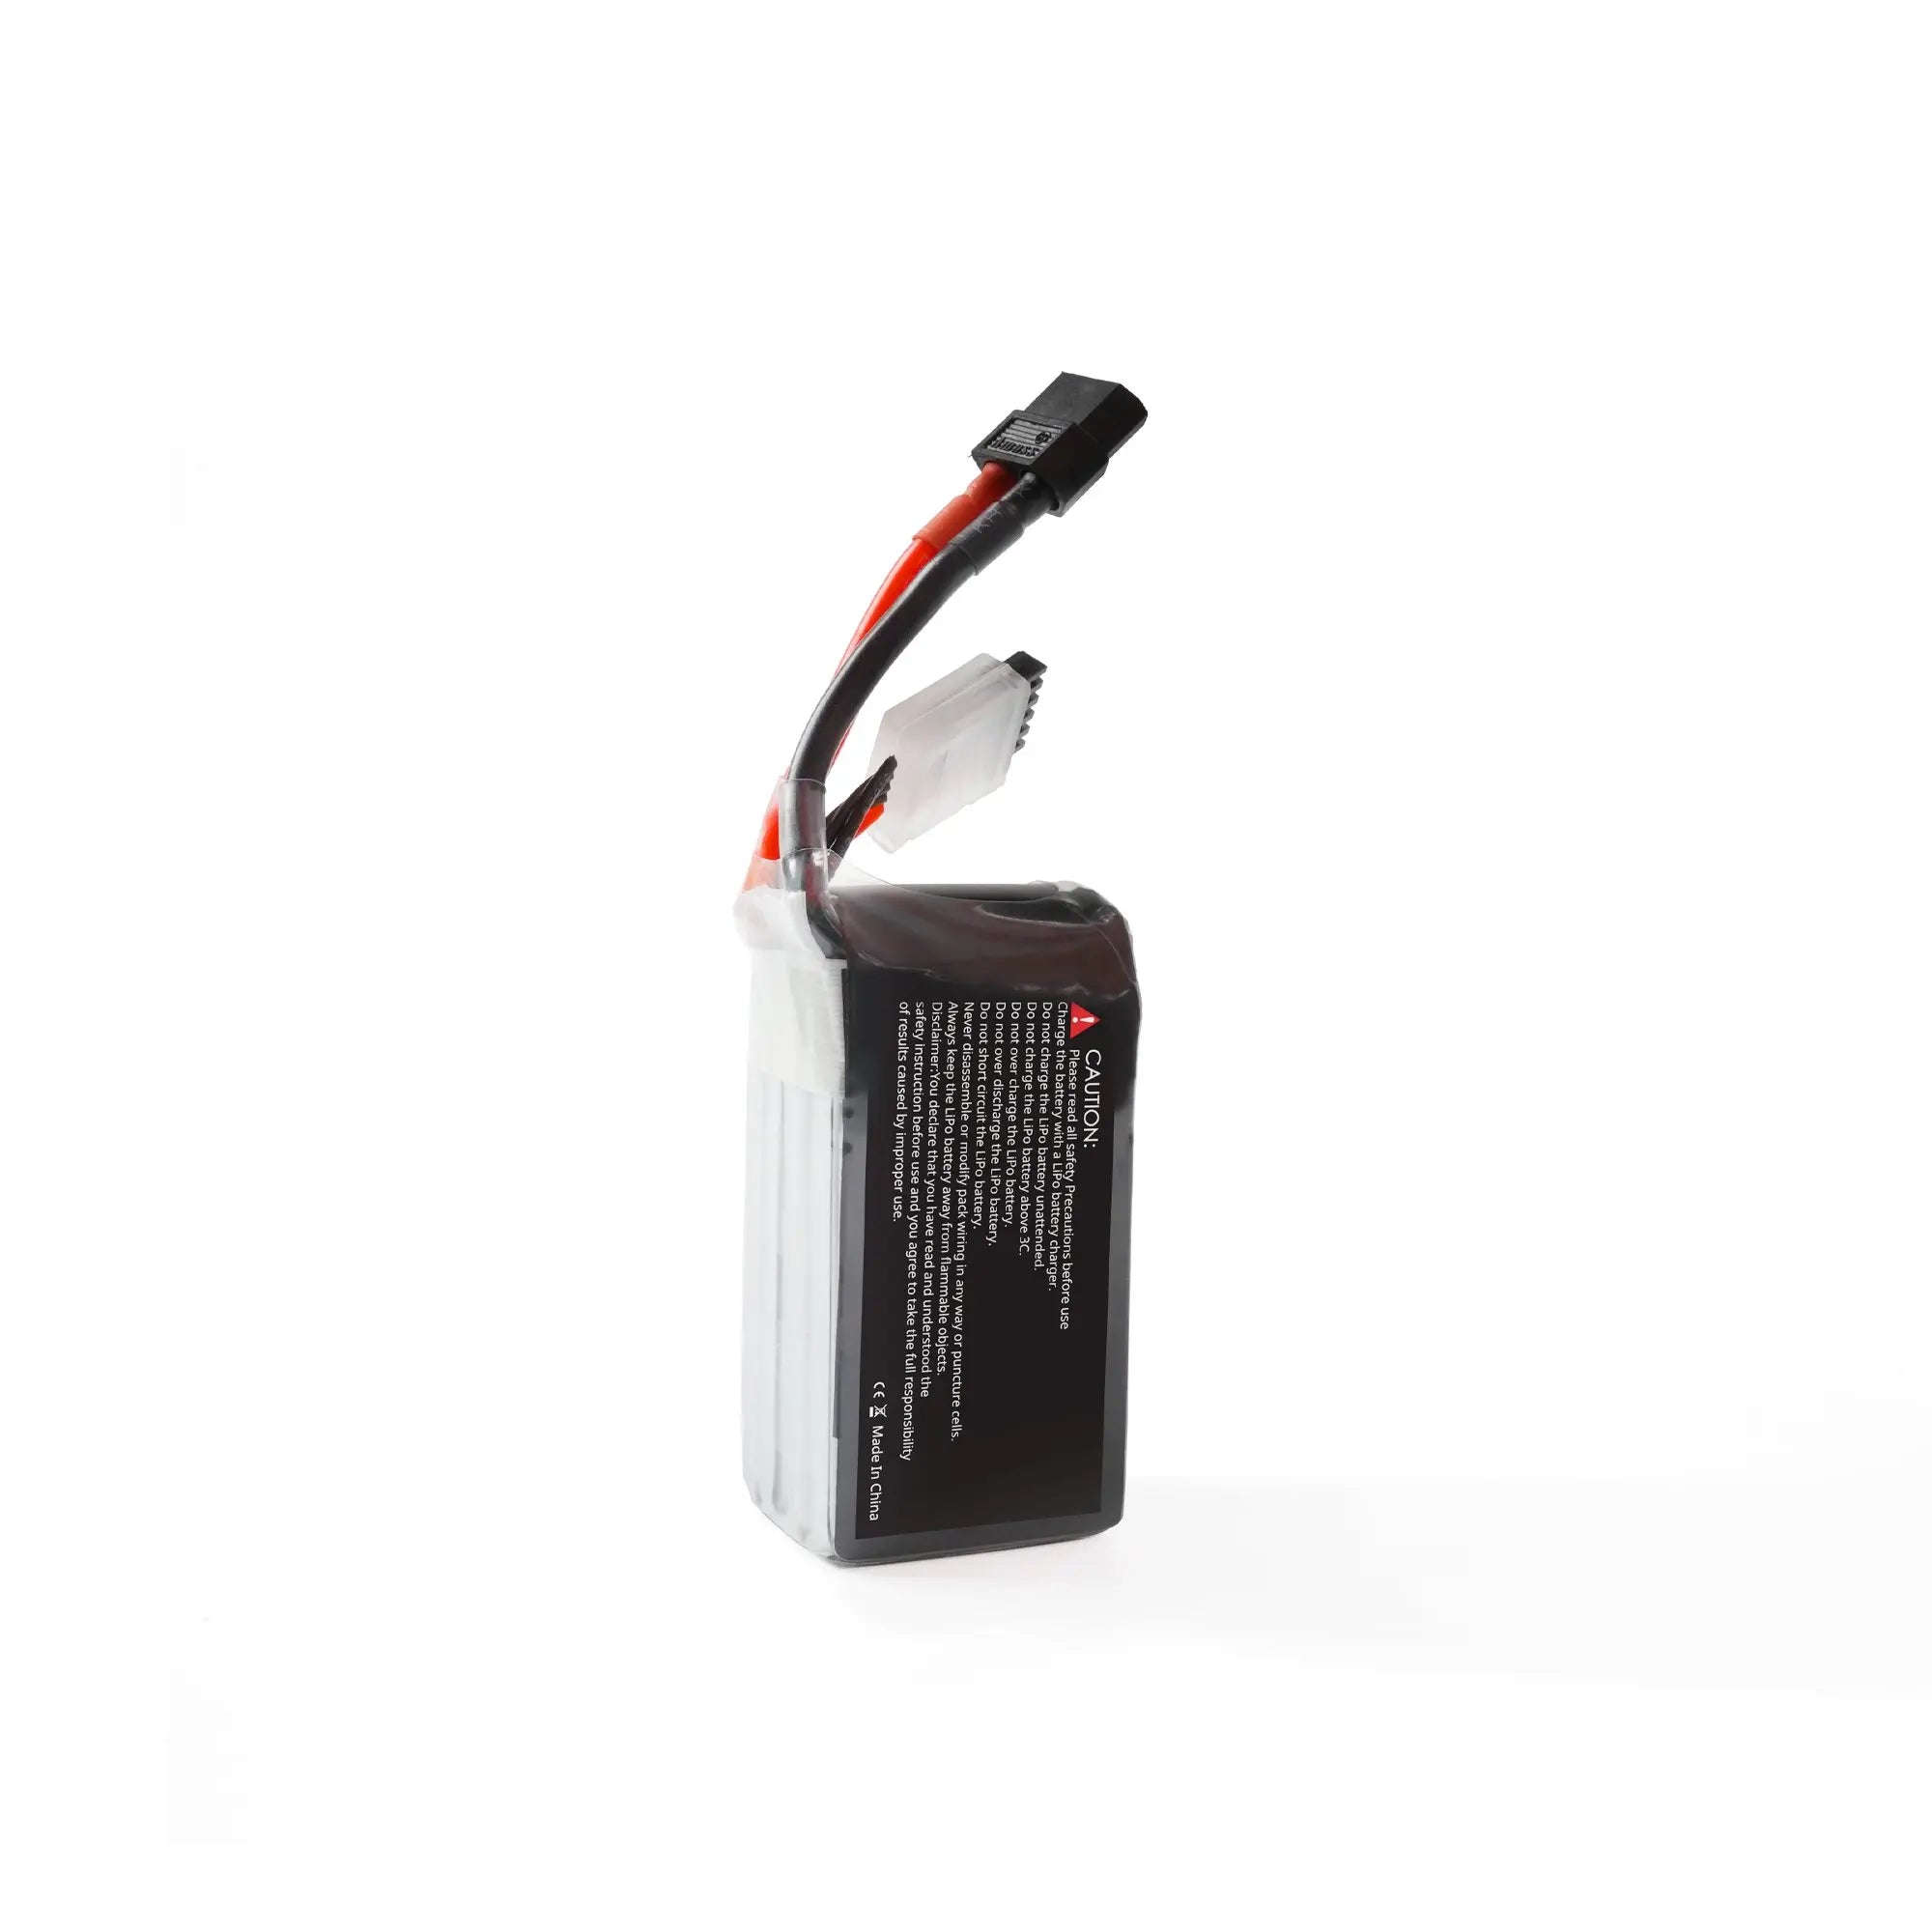 GEPRC Storm 4S 1550mAh 120C Lipo Battery, Check carefully whether the battery and connector are normal